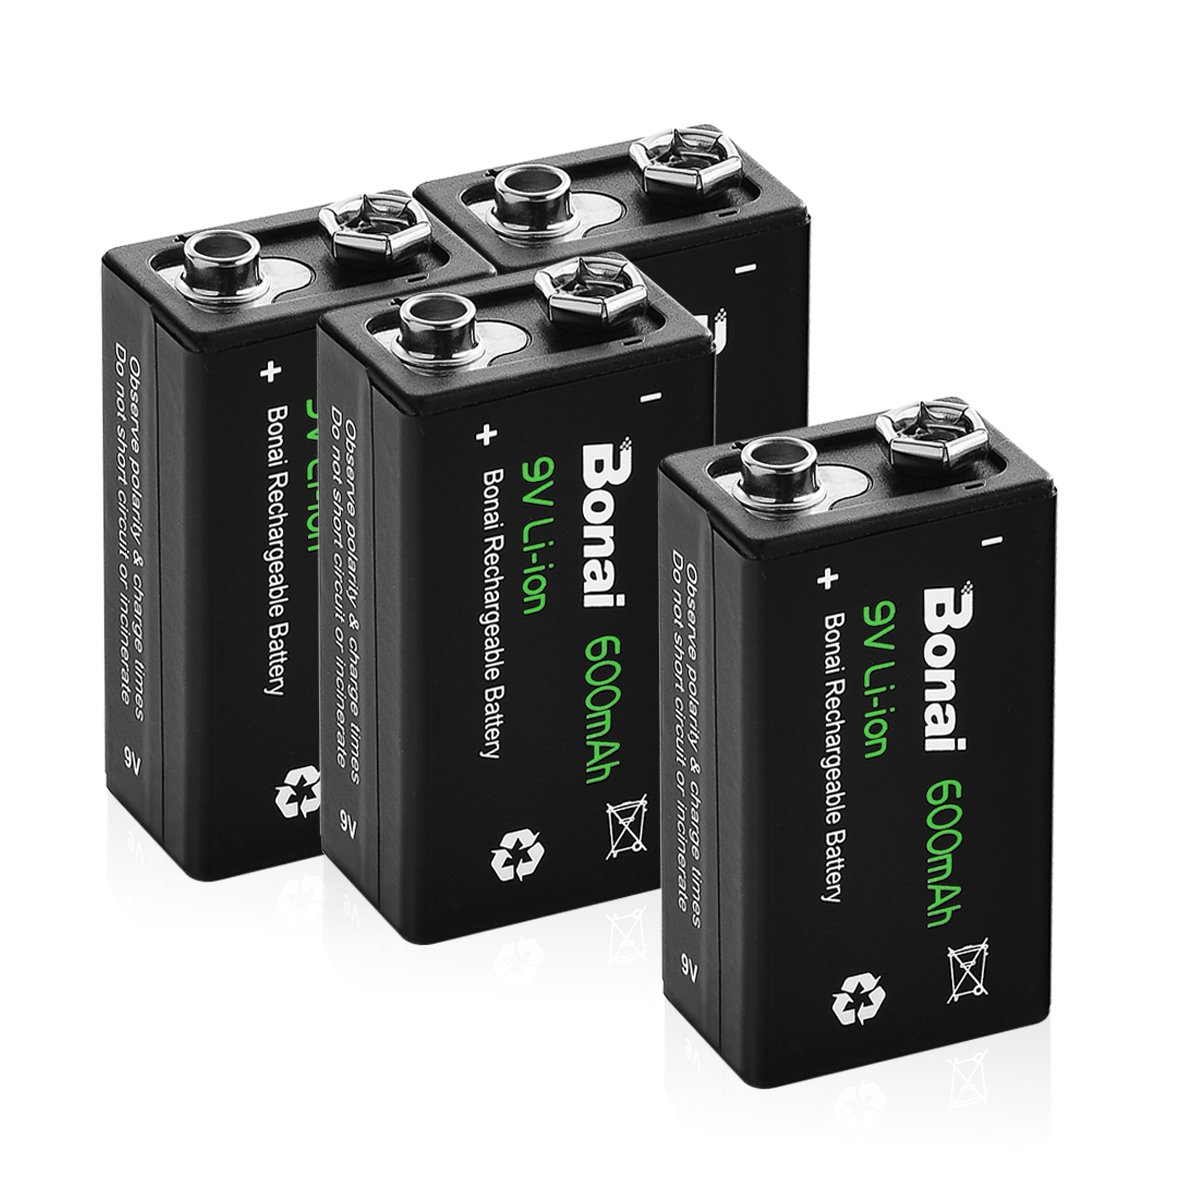 Recharge Universal 9-Volt Battery (1-Pack), Rechargeable 9V Battery